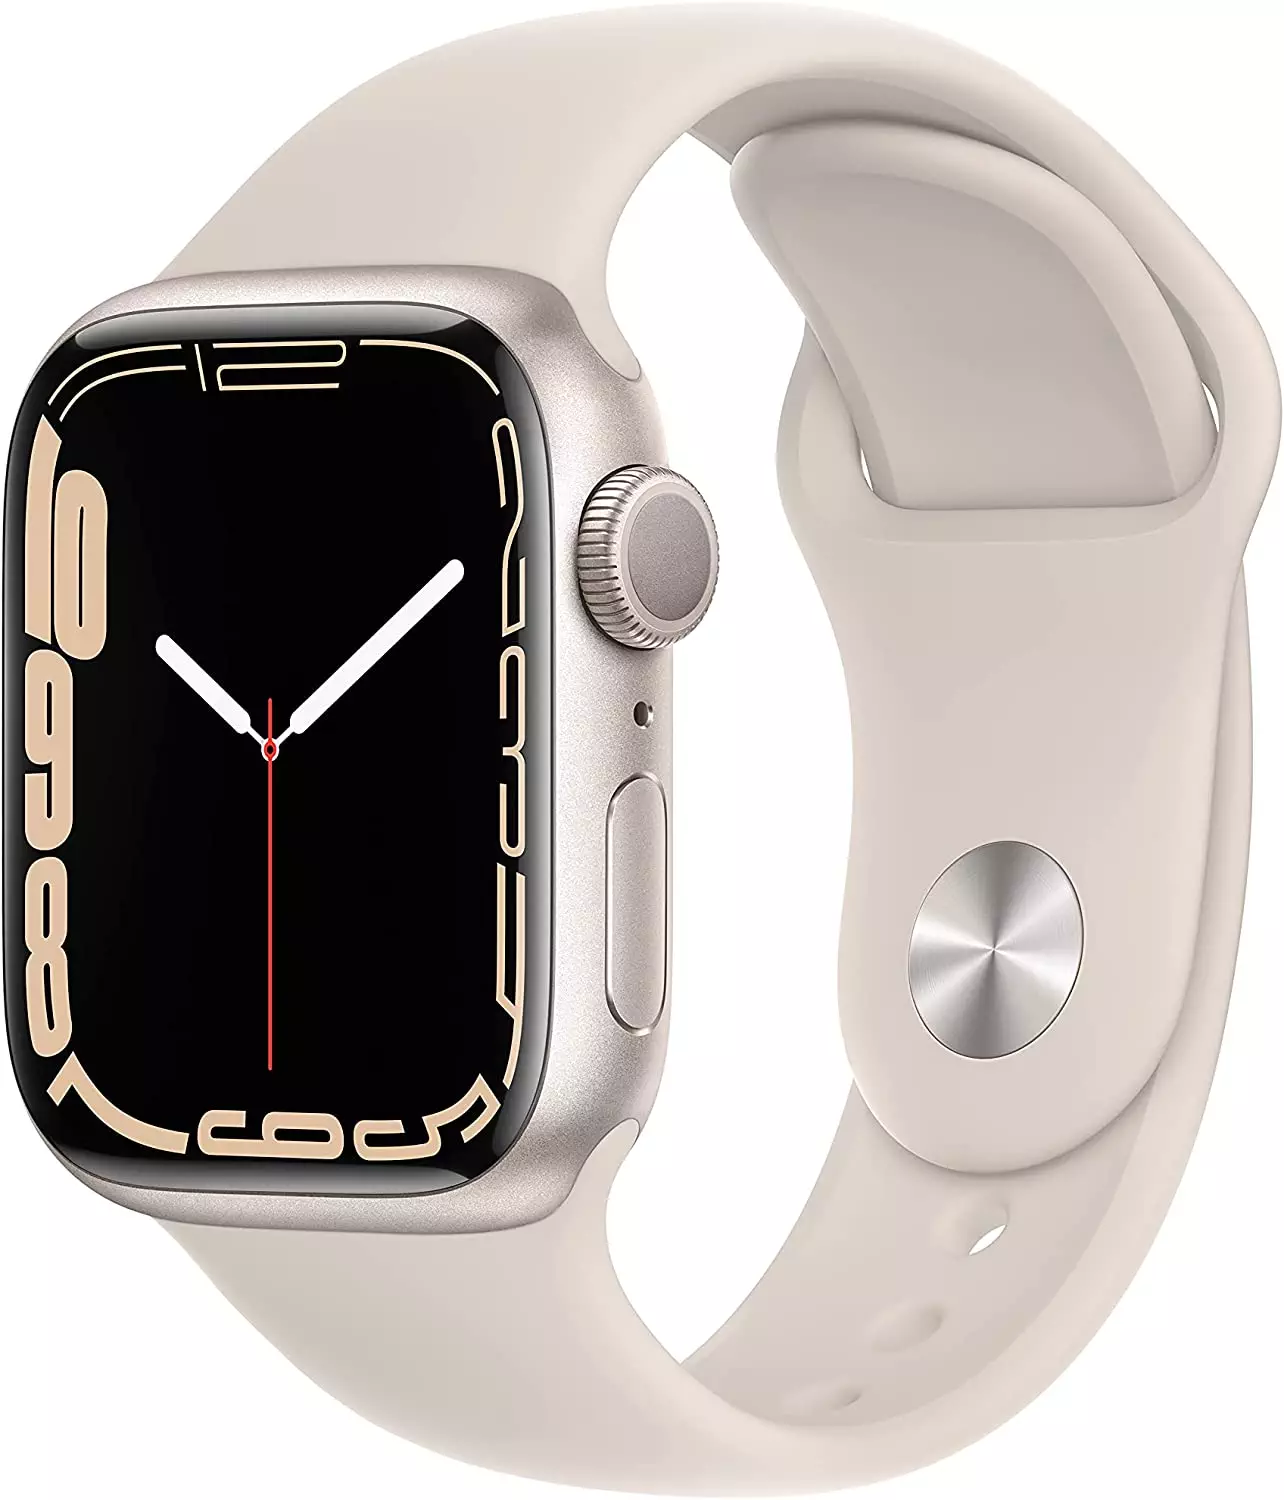 The Useful Apple Watch Series 7 Is A Must Have